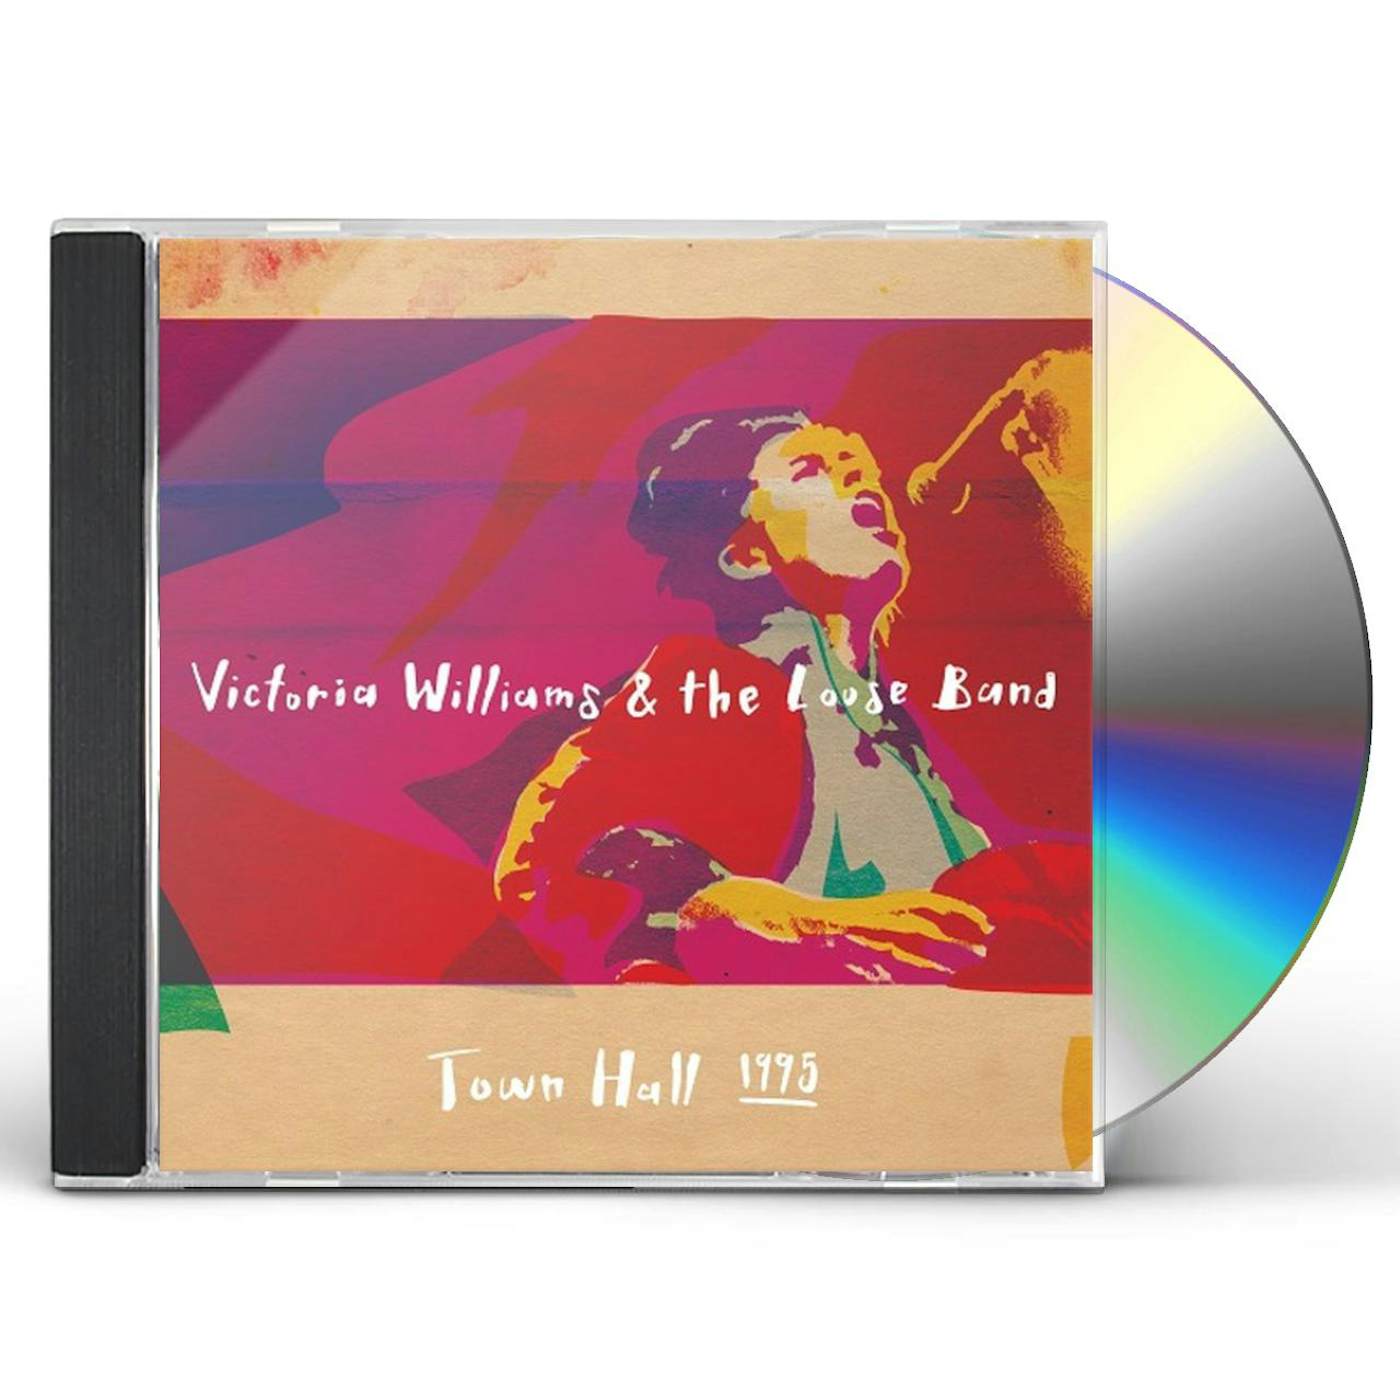 VICTORIA WILLIAMS & THE LOOSE BAND 'TOWN HALL 1995' CD